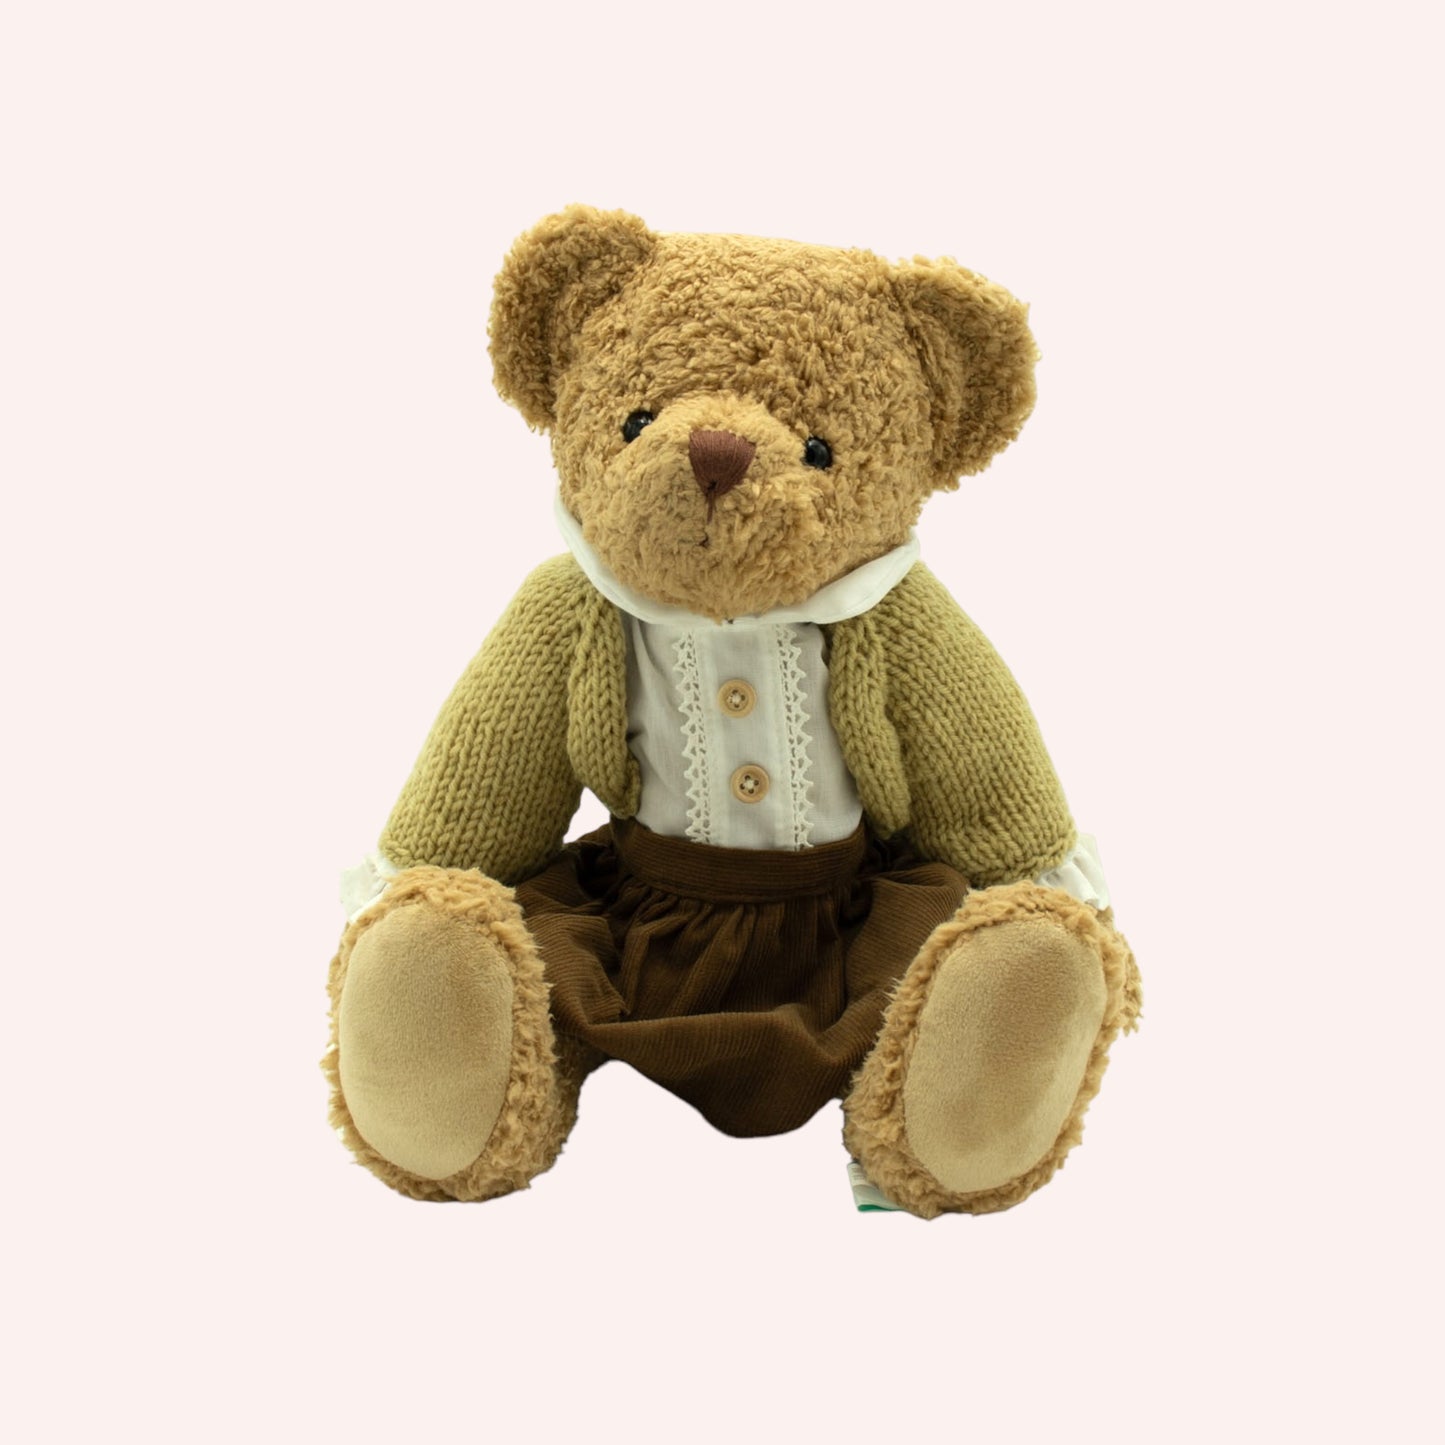 Ms. Teddy with Knitted Cardigan